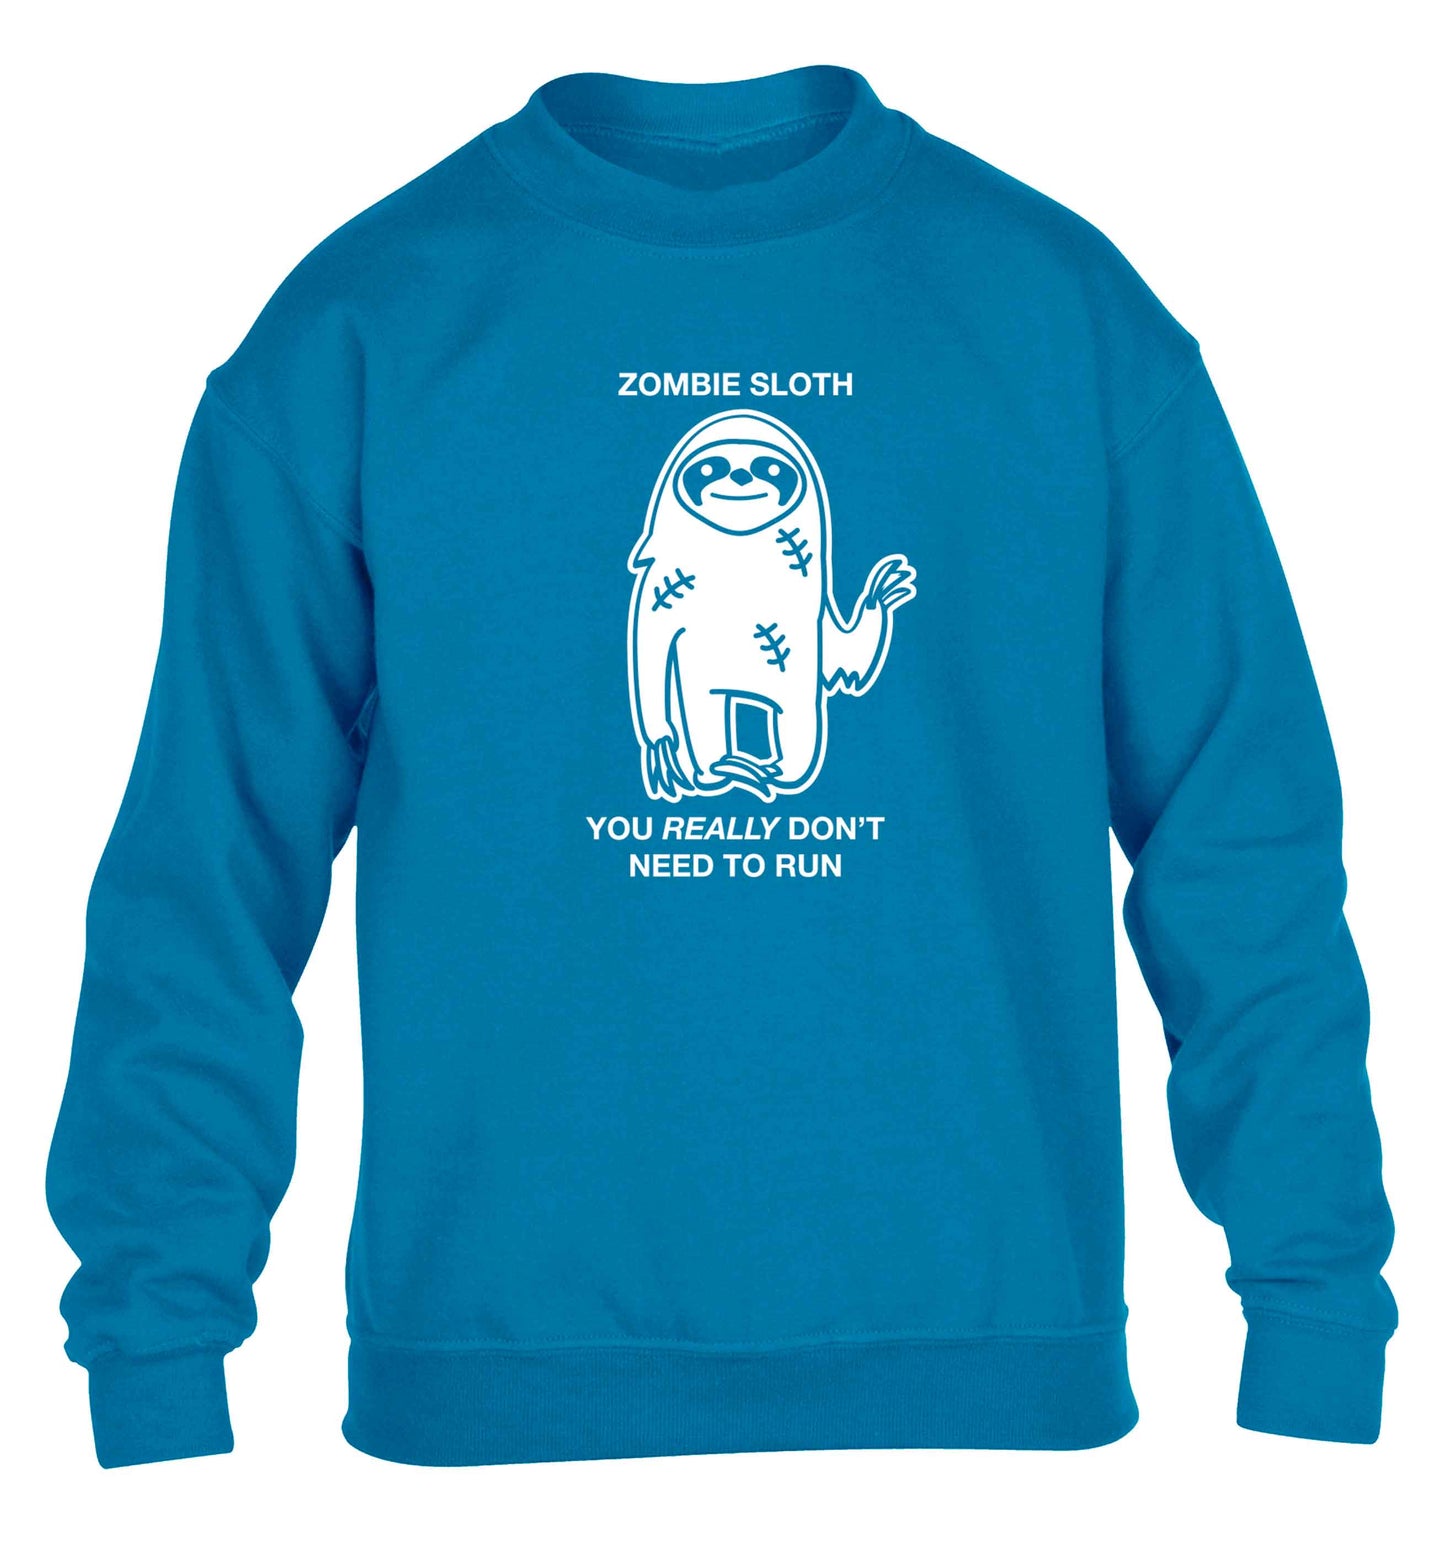 Zombie sloth you really don't need to run children's blue sweater 12-13 Years